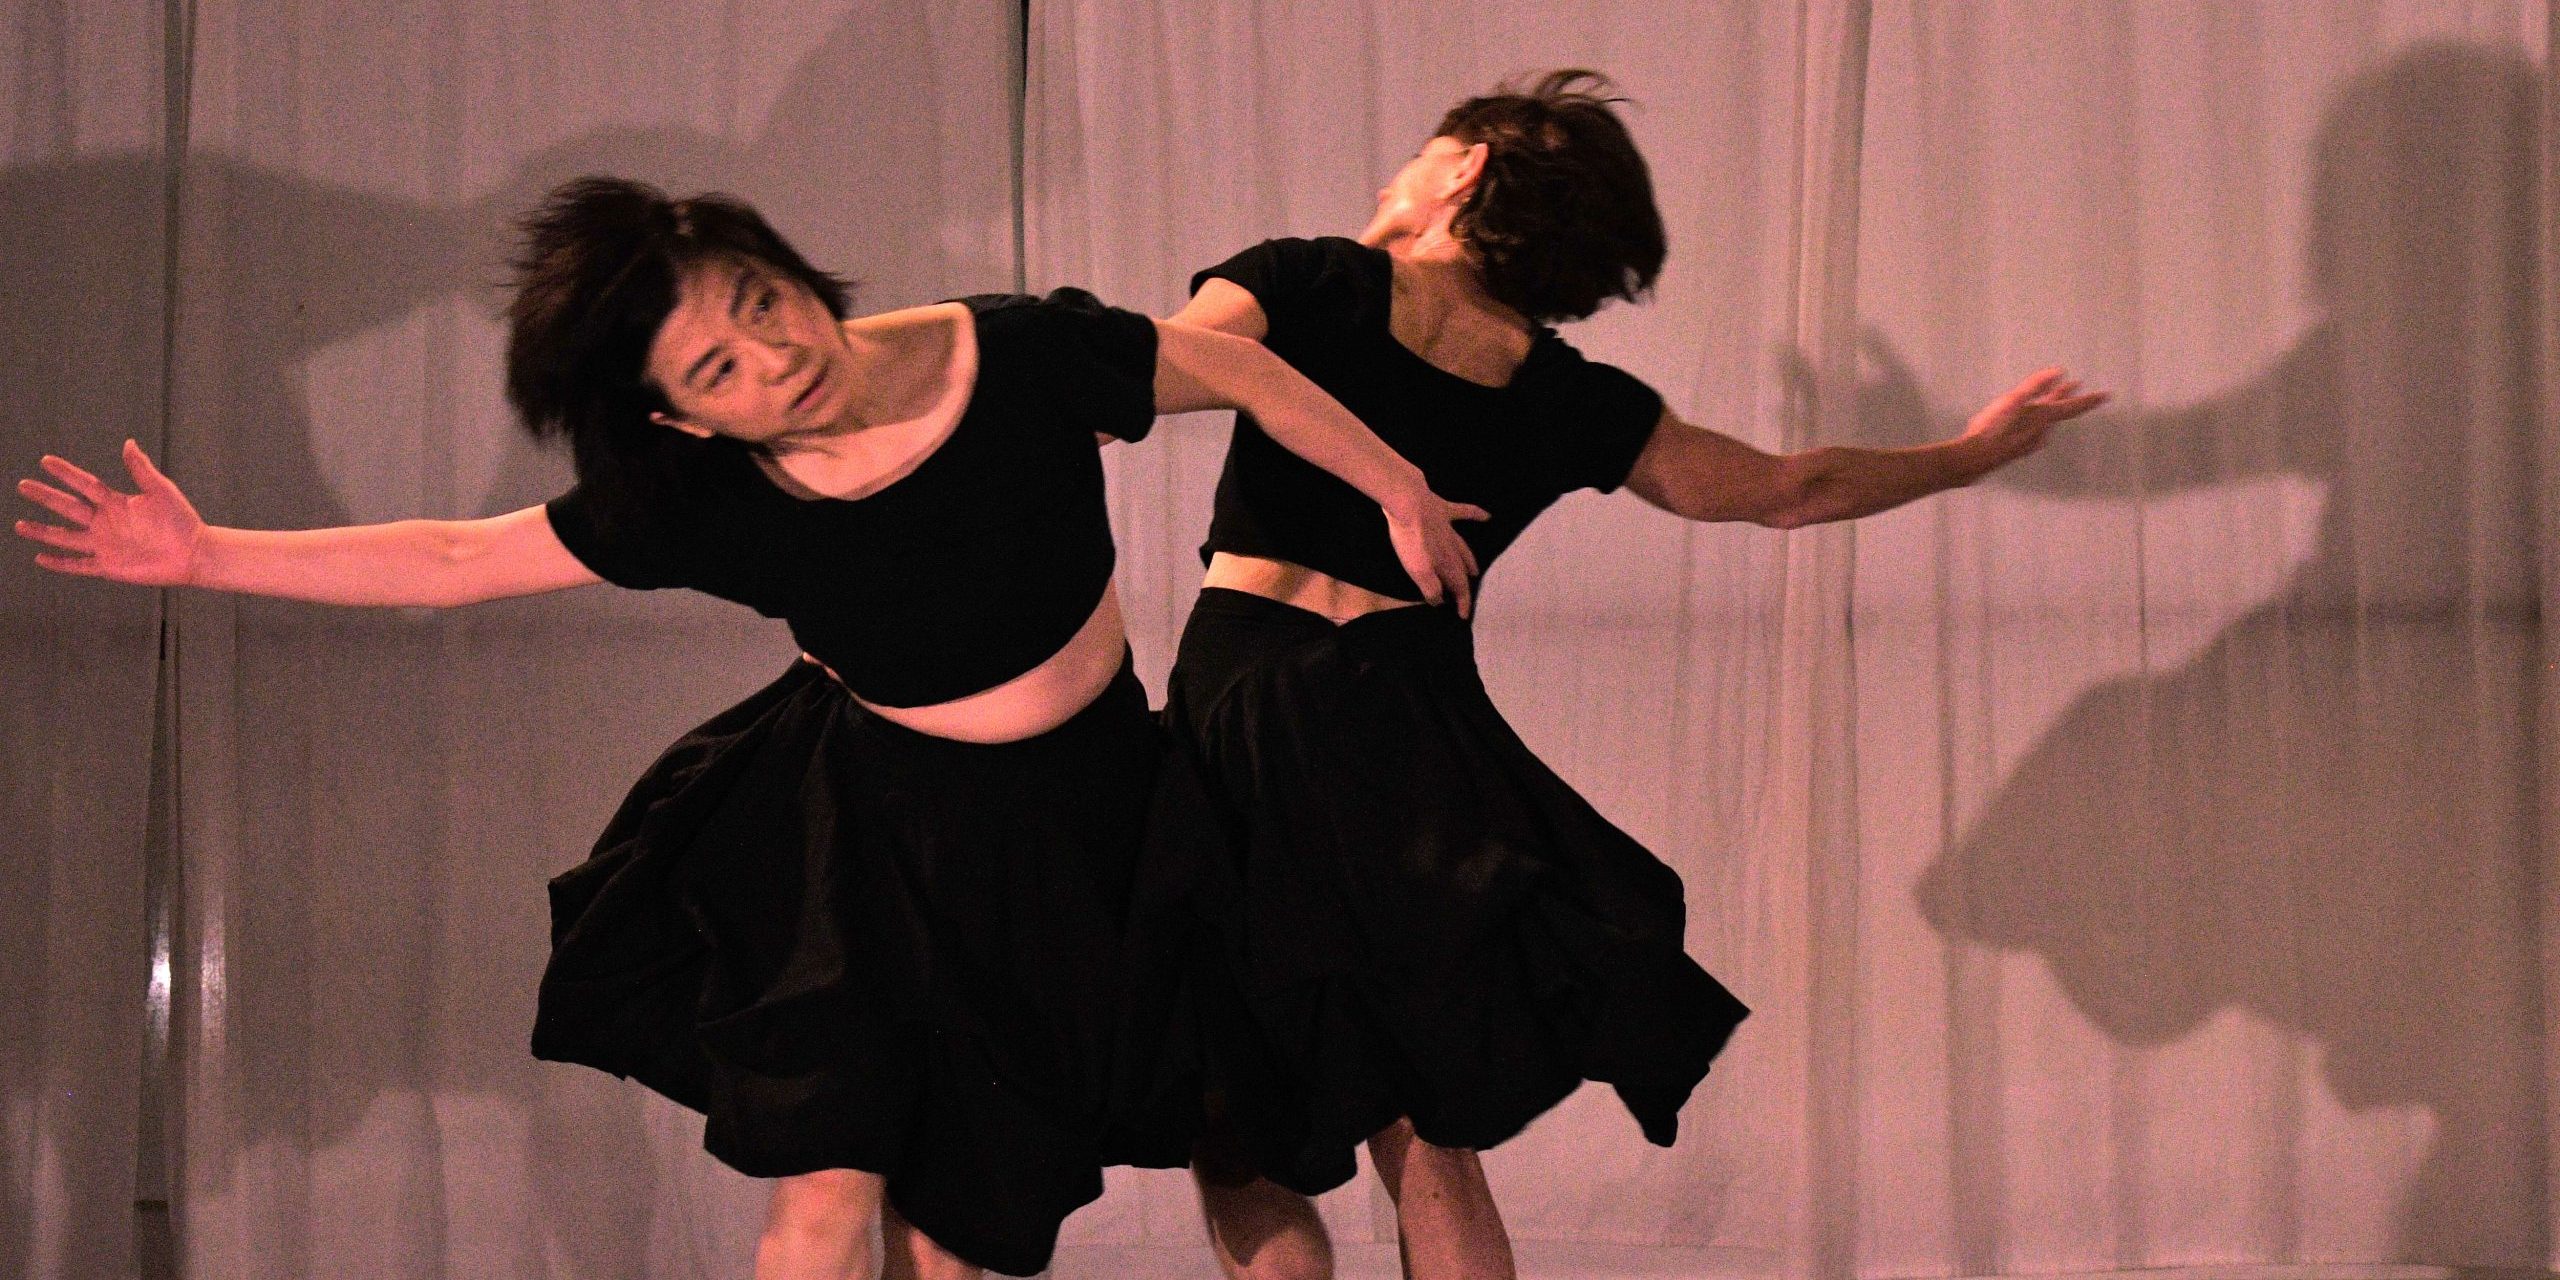 Chingchi Yu and Carol Kuefer-Moore in Veil of Water. Photo credit: Aileen Kim